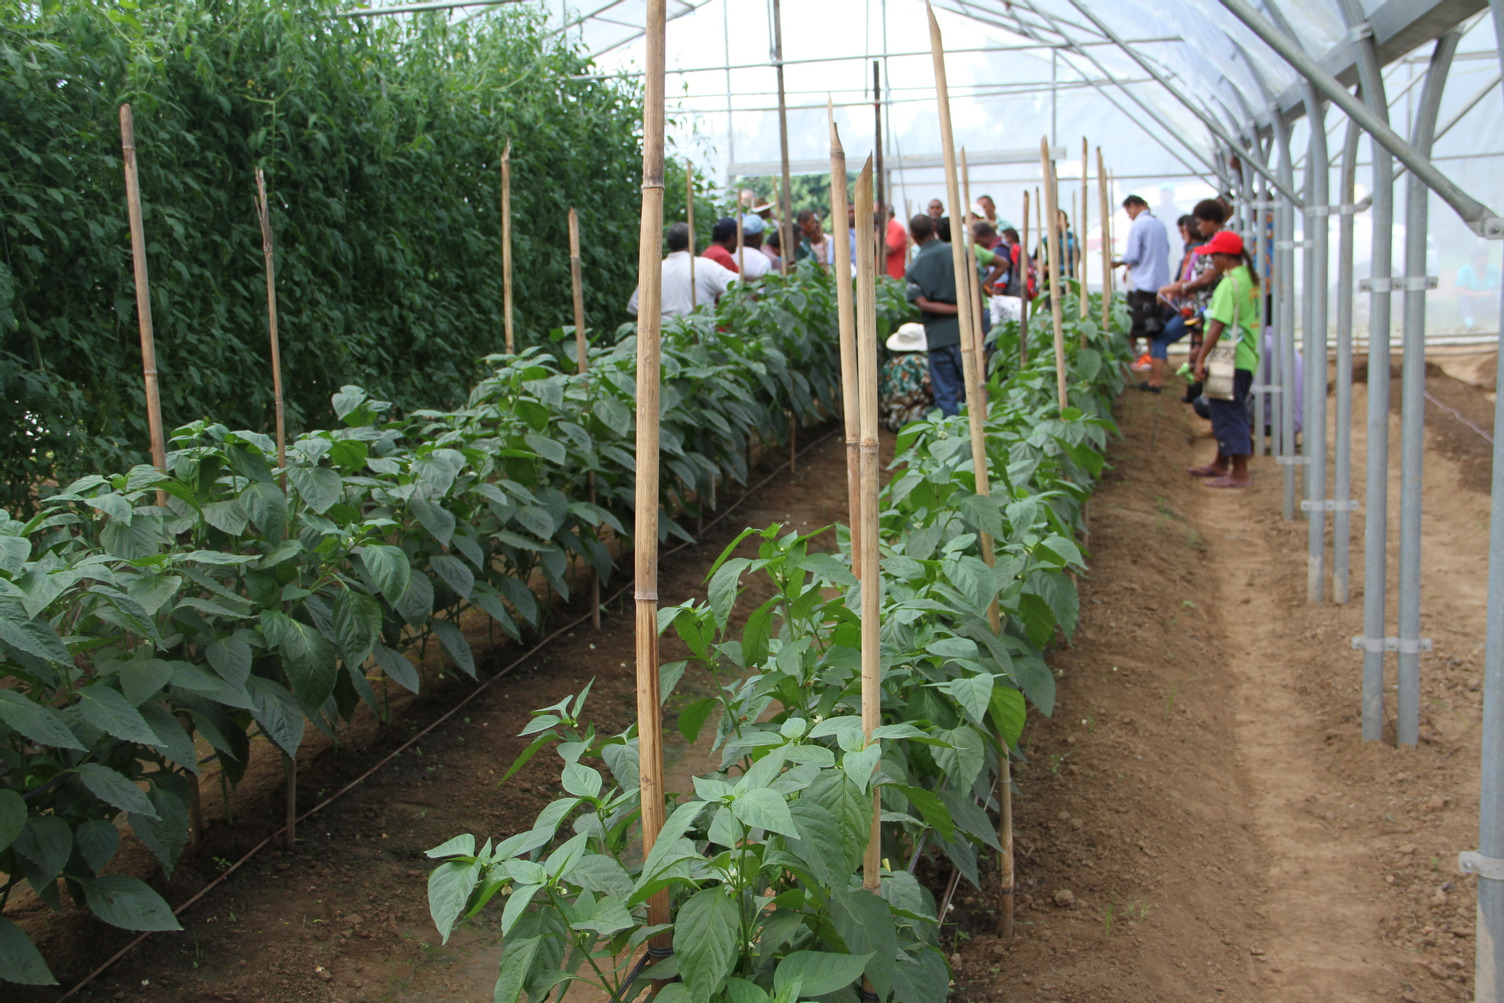 Local Fijian farmer, Emosi Ravato, has adopted the use of greenhouses and high tunnel -a plastic covered structure that allows growers to increase production of certain crops, grow some crops that could not otherwise be grown in their area, and extend the length of time in the year.